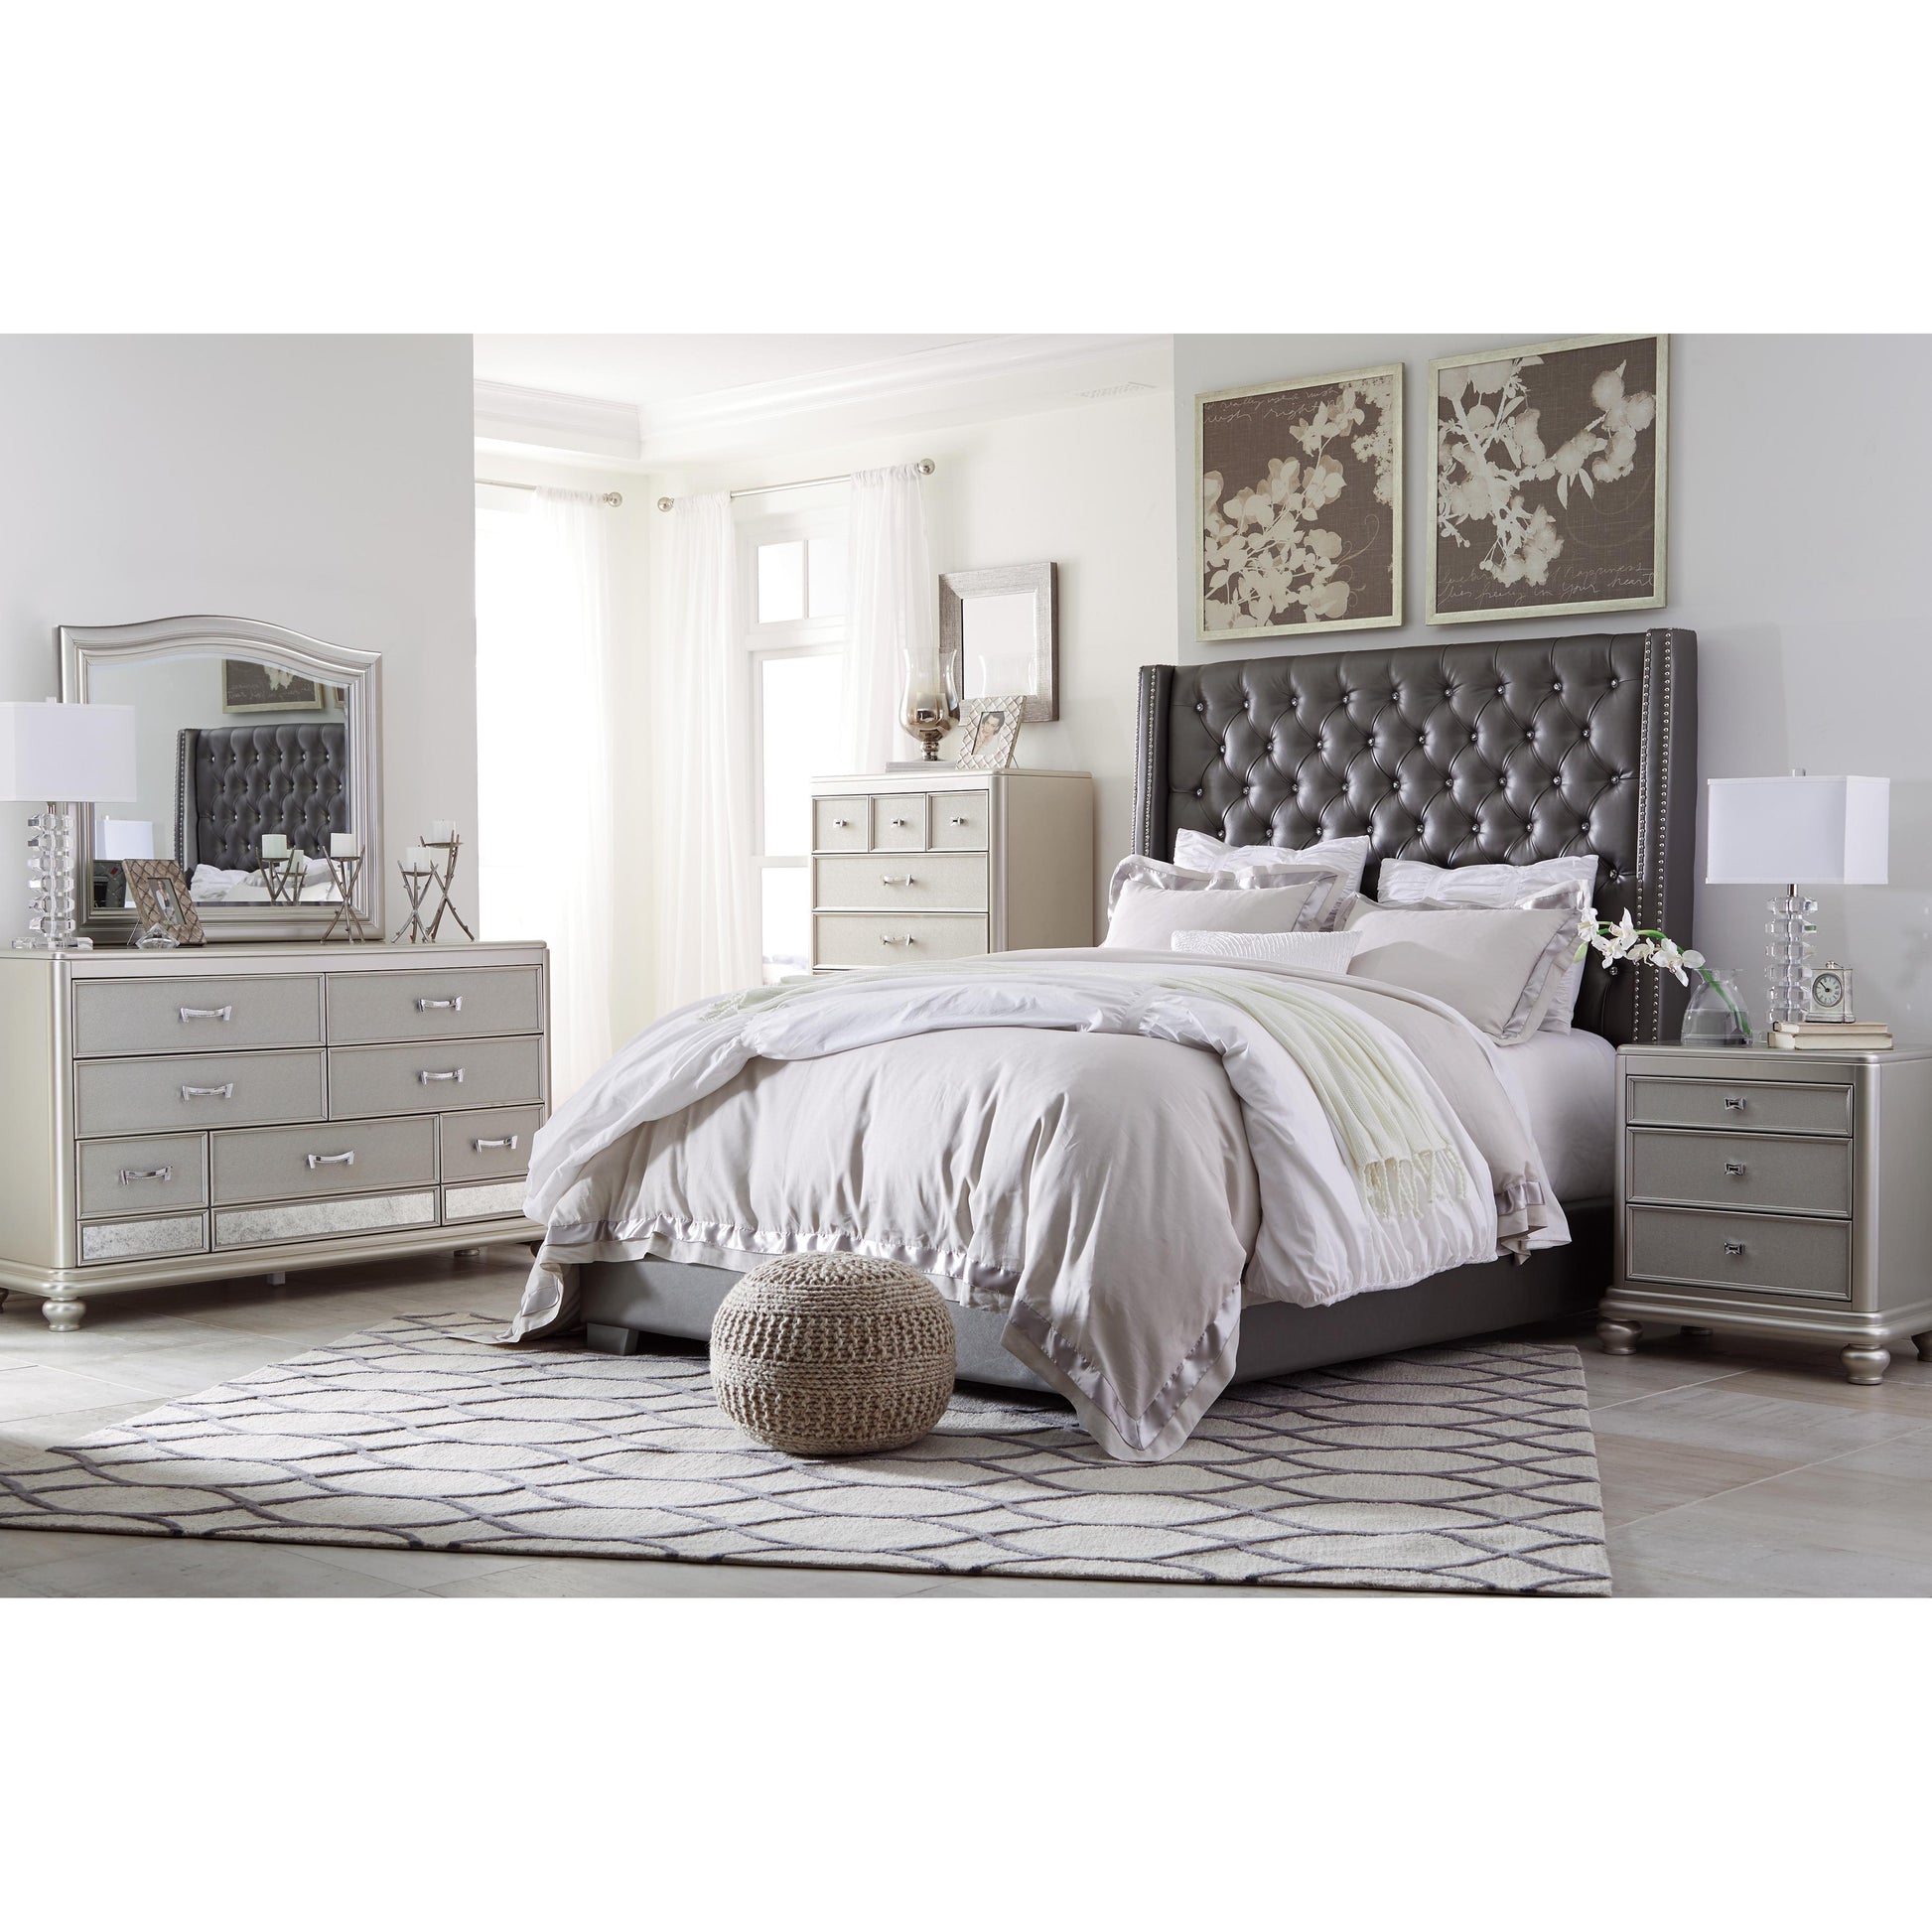 Signature Design by Ashley Coralayne King Upholstered Bed B650-78/B650-76